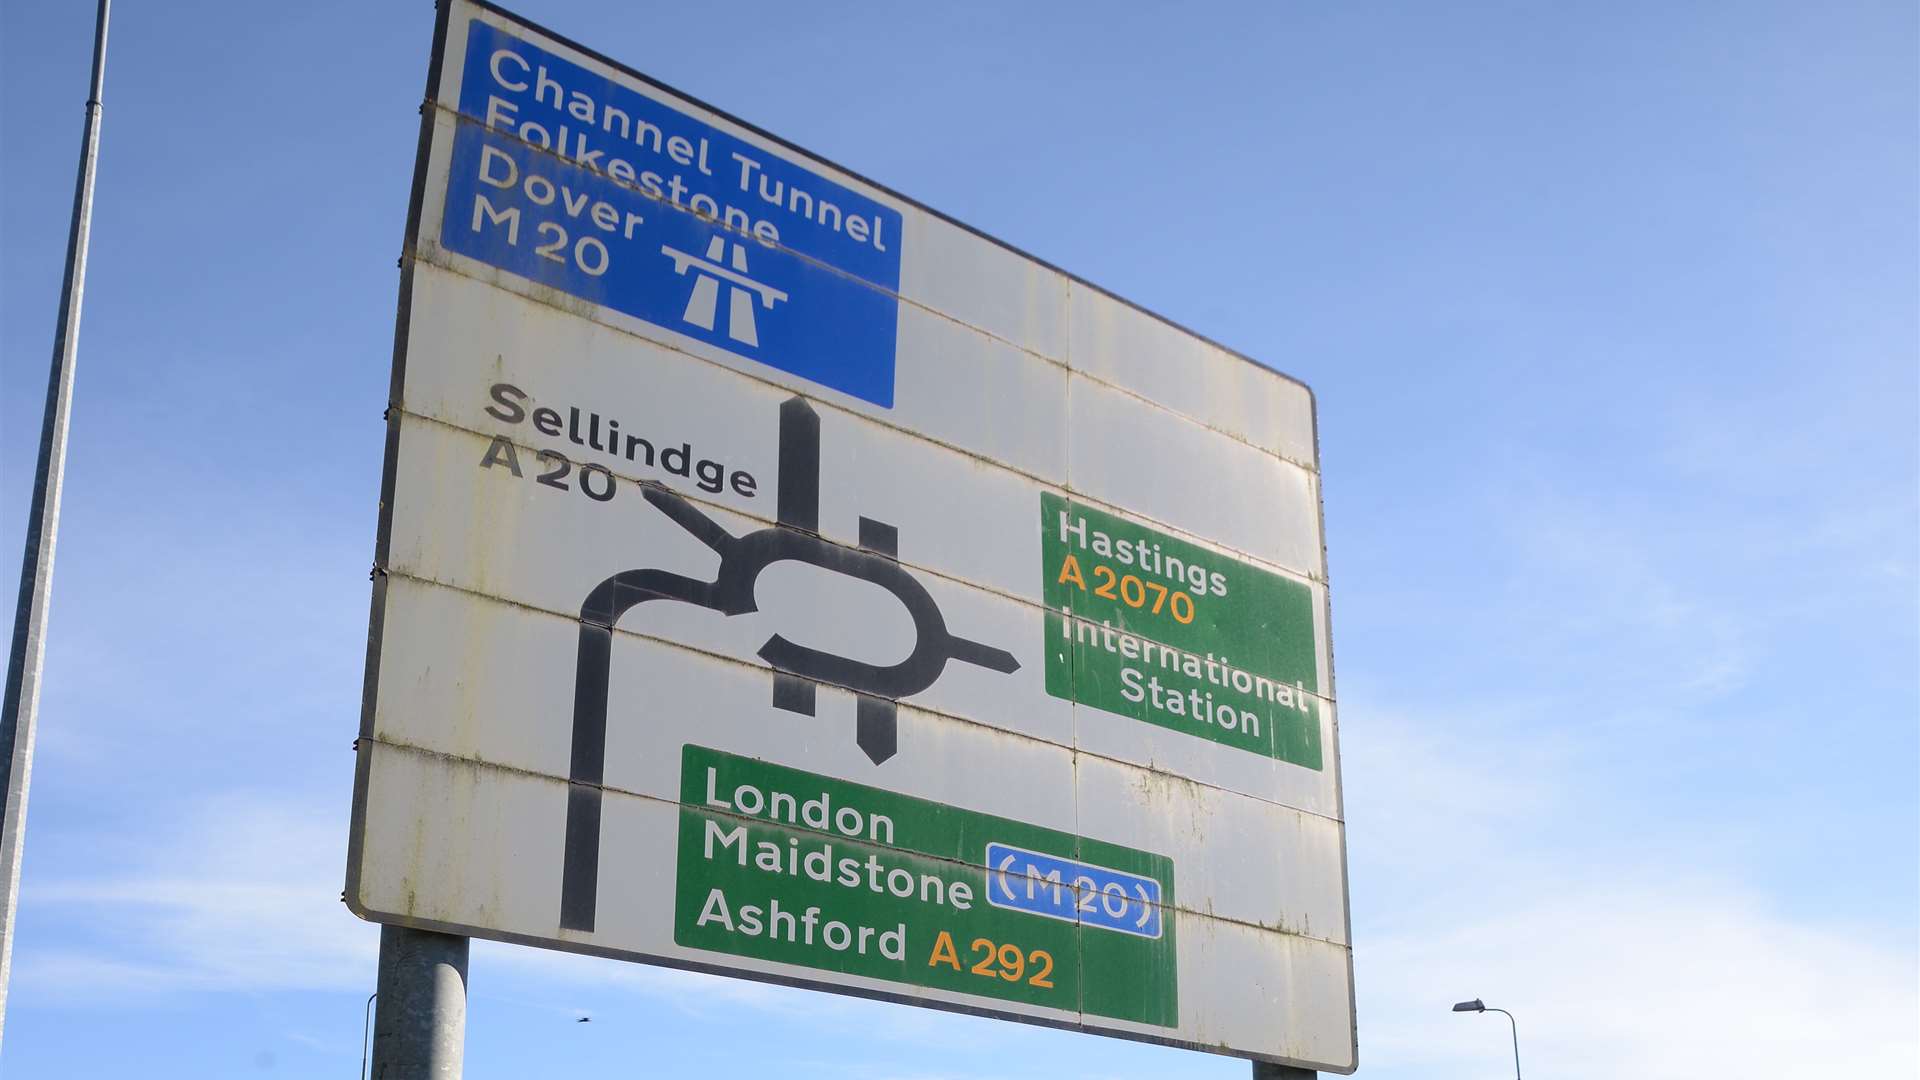 Junction 10 is causing problems again for motorists